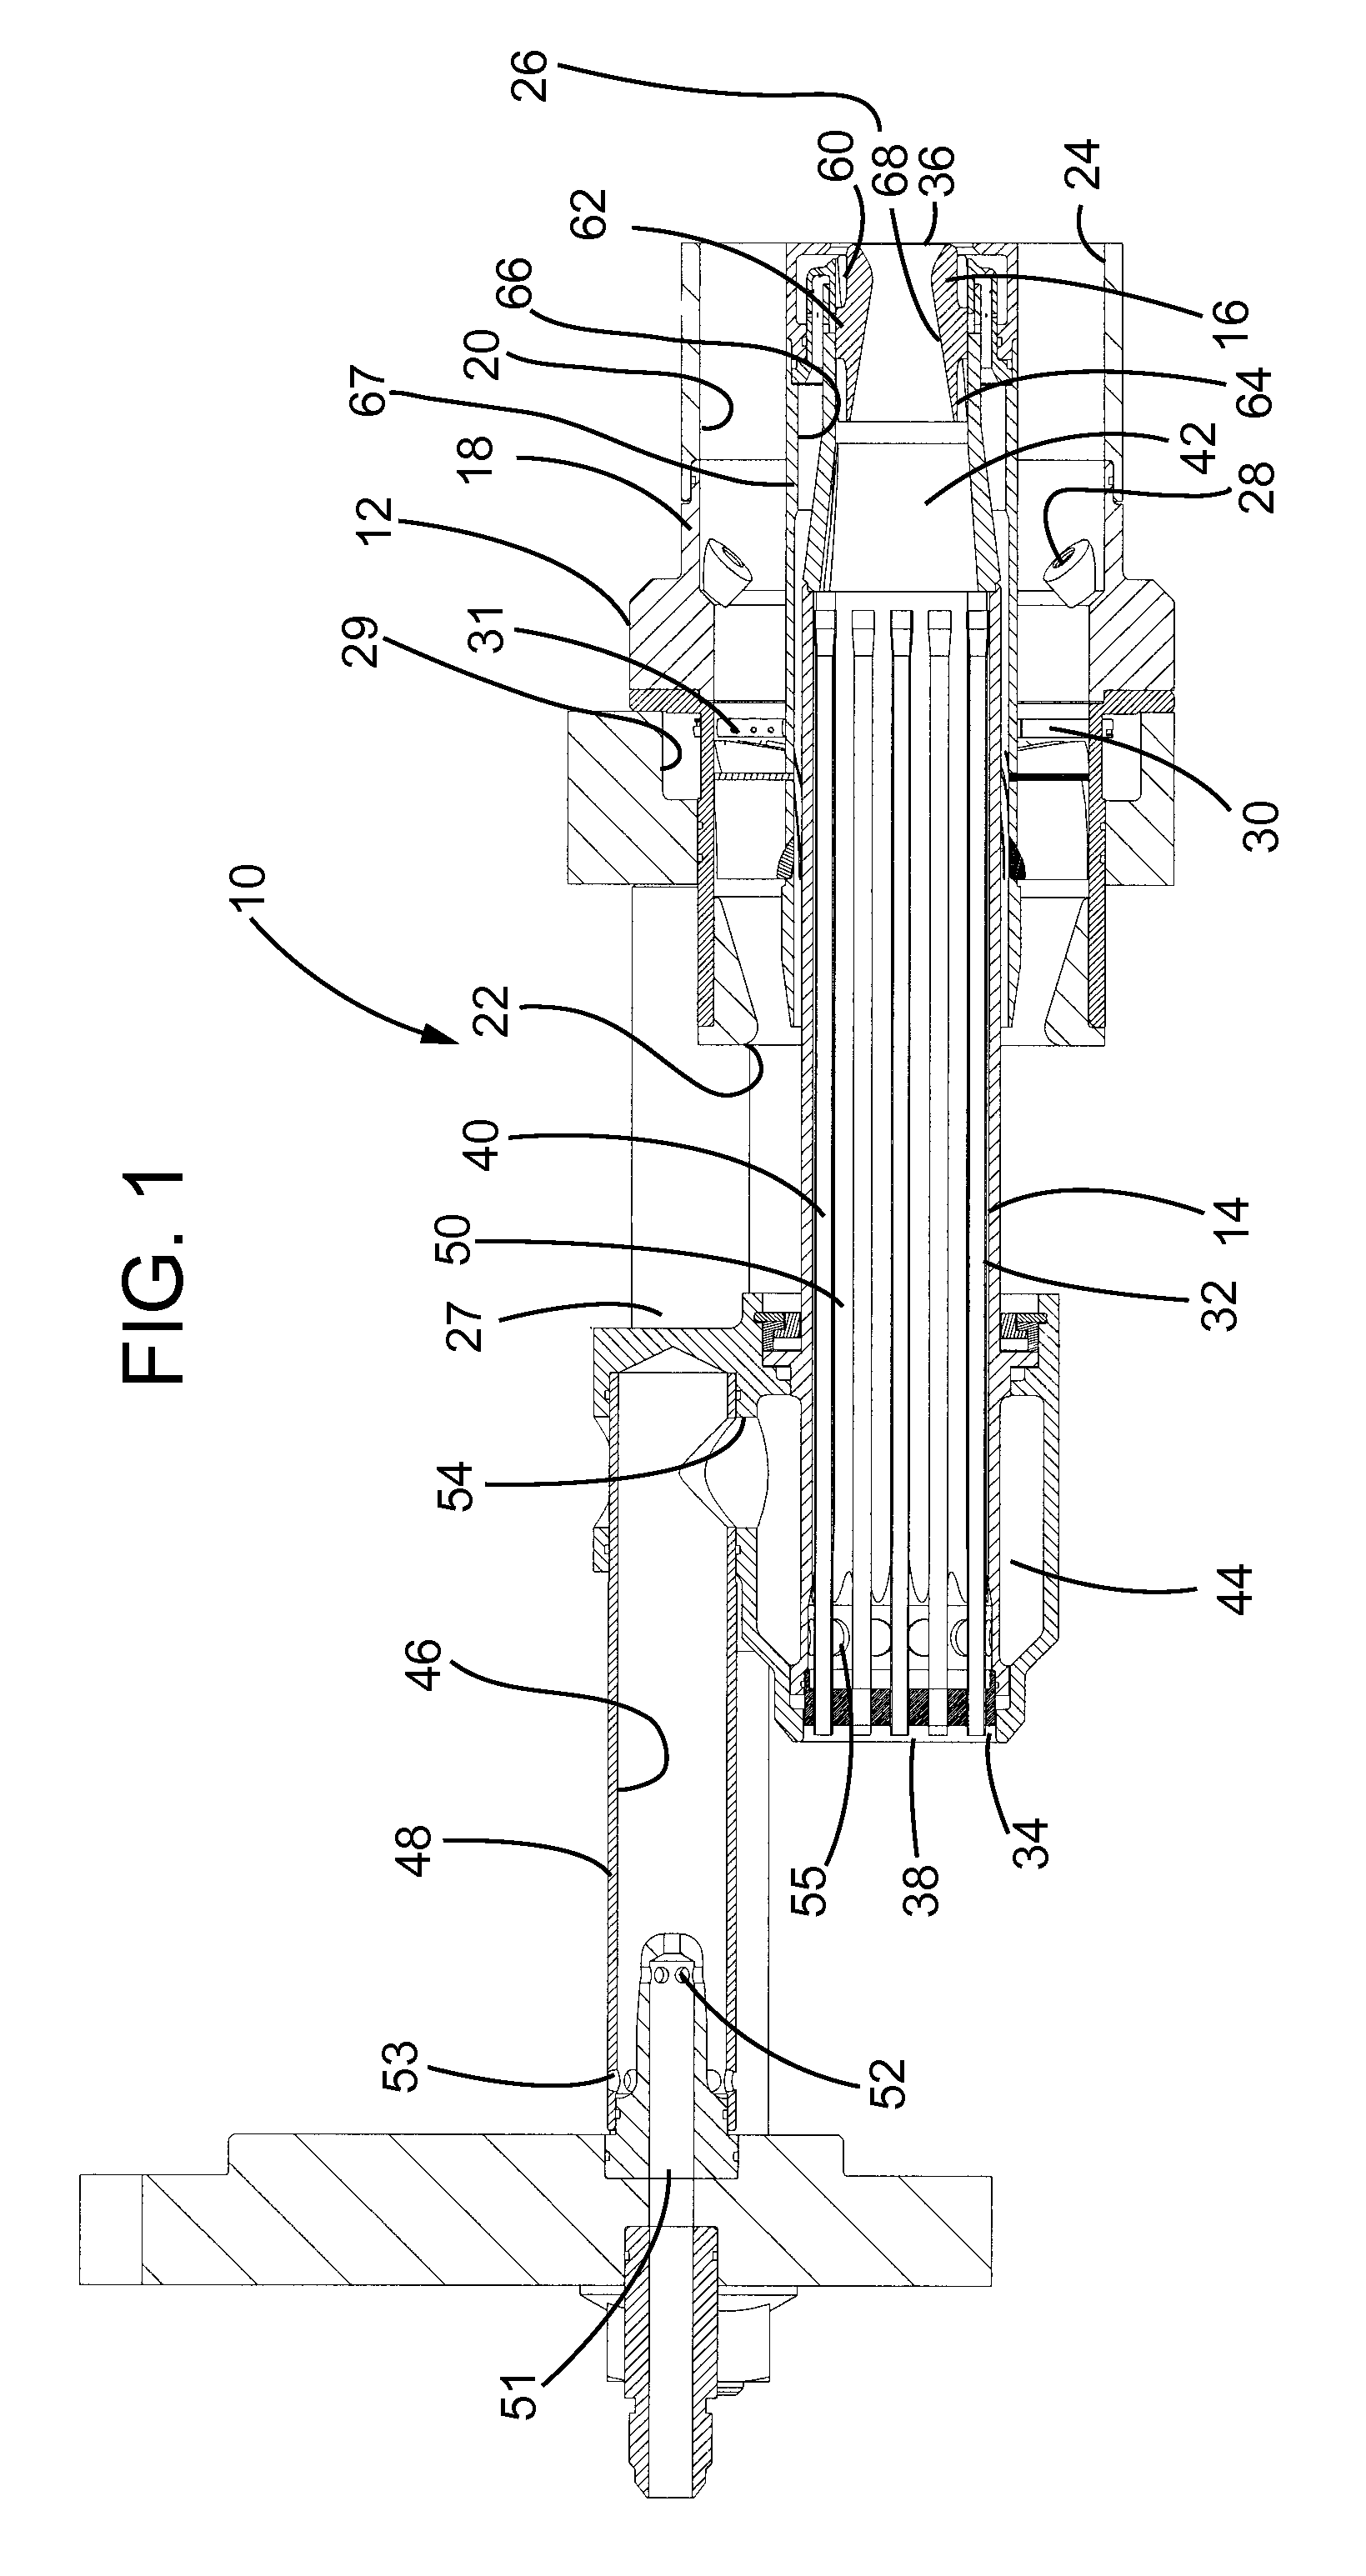 Flow conditioner for fuel injector for combustor and method for low-NOx combustor